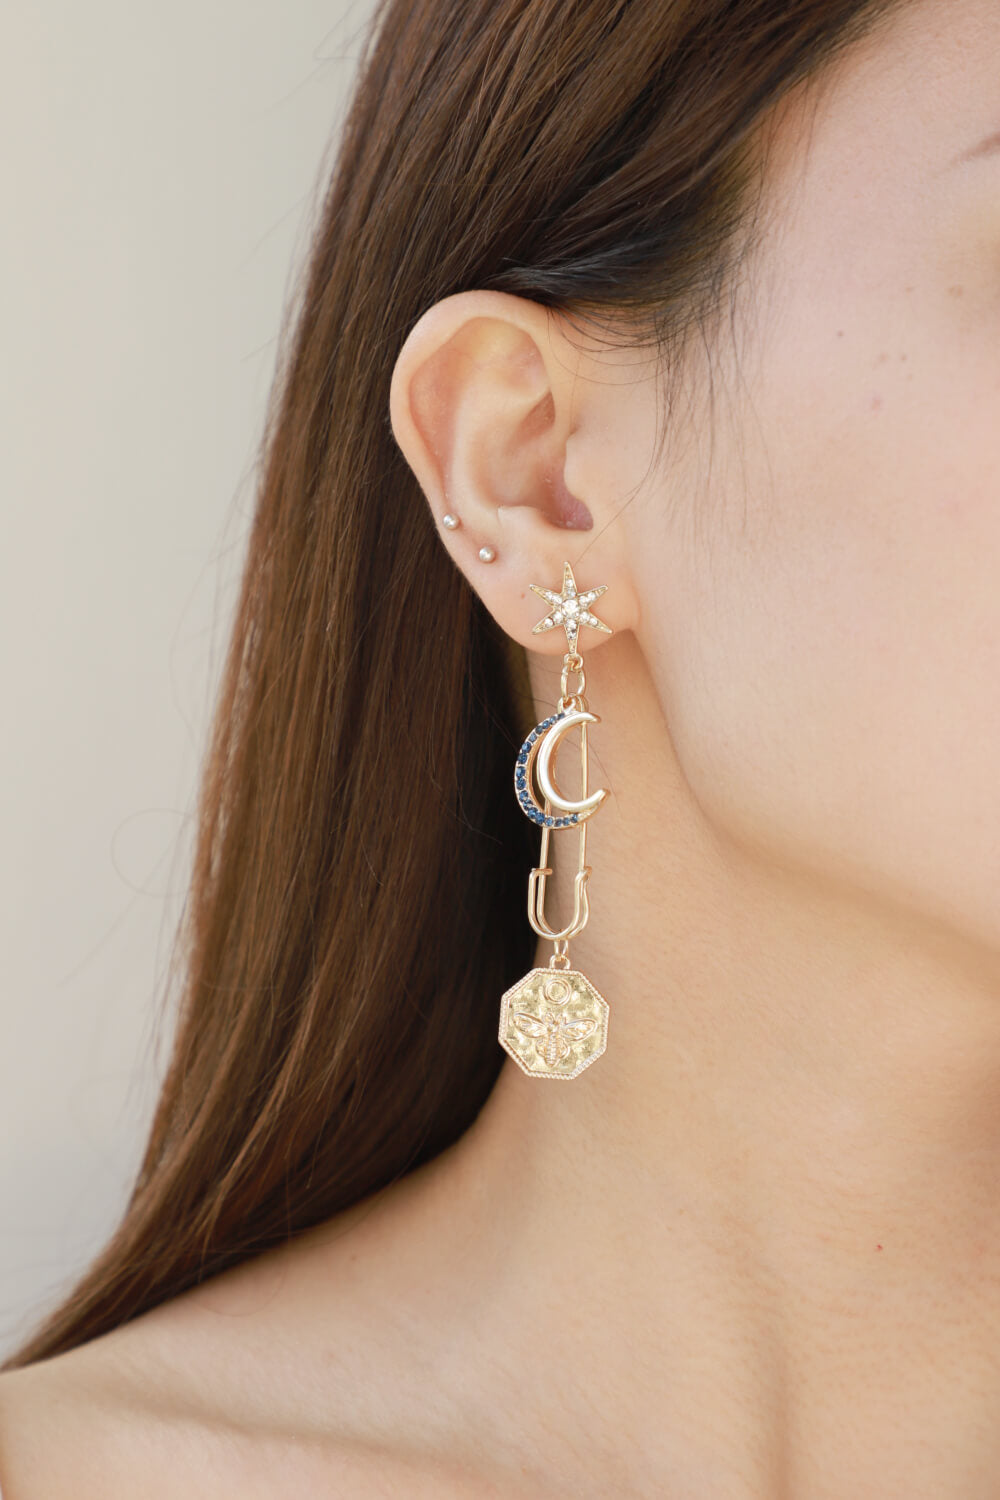 Inlaid Rhinestone Moon and Star Drop Earrings -  Nueva Moda Boutique By Giselly 